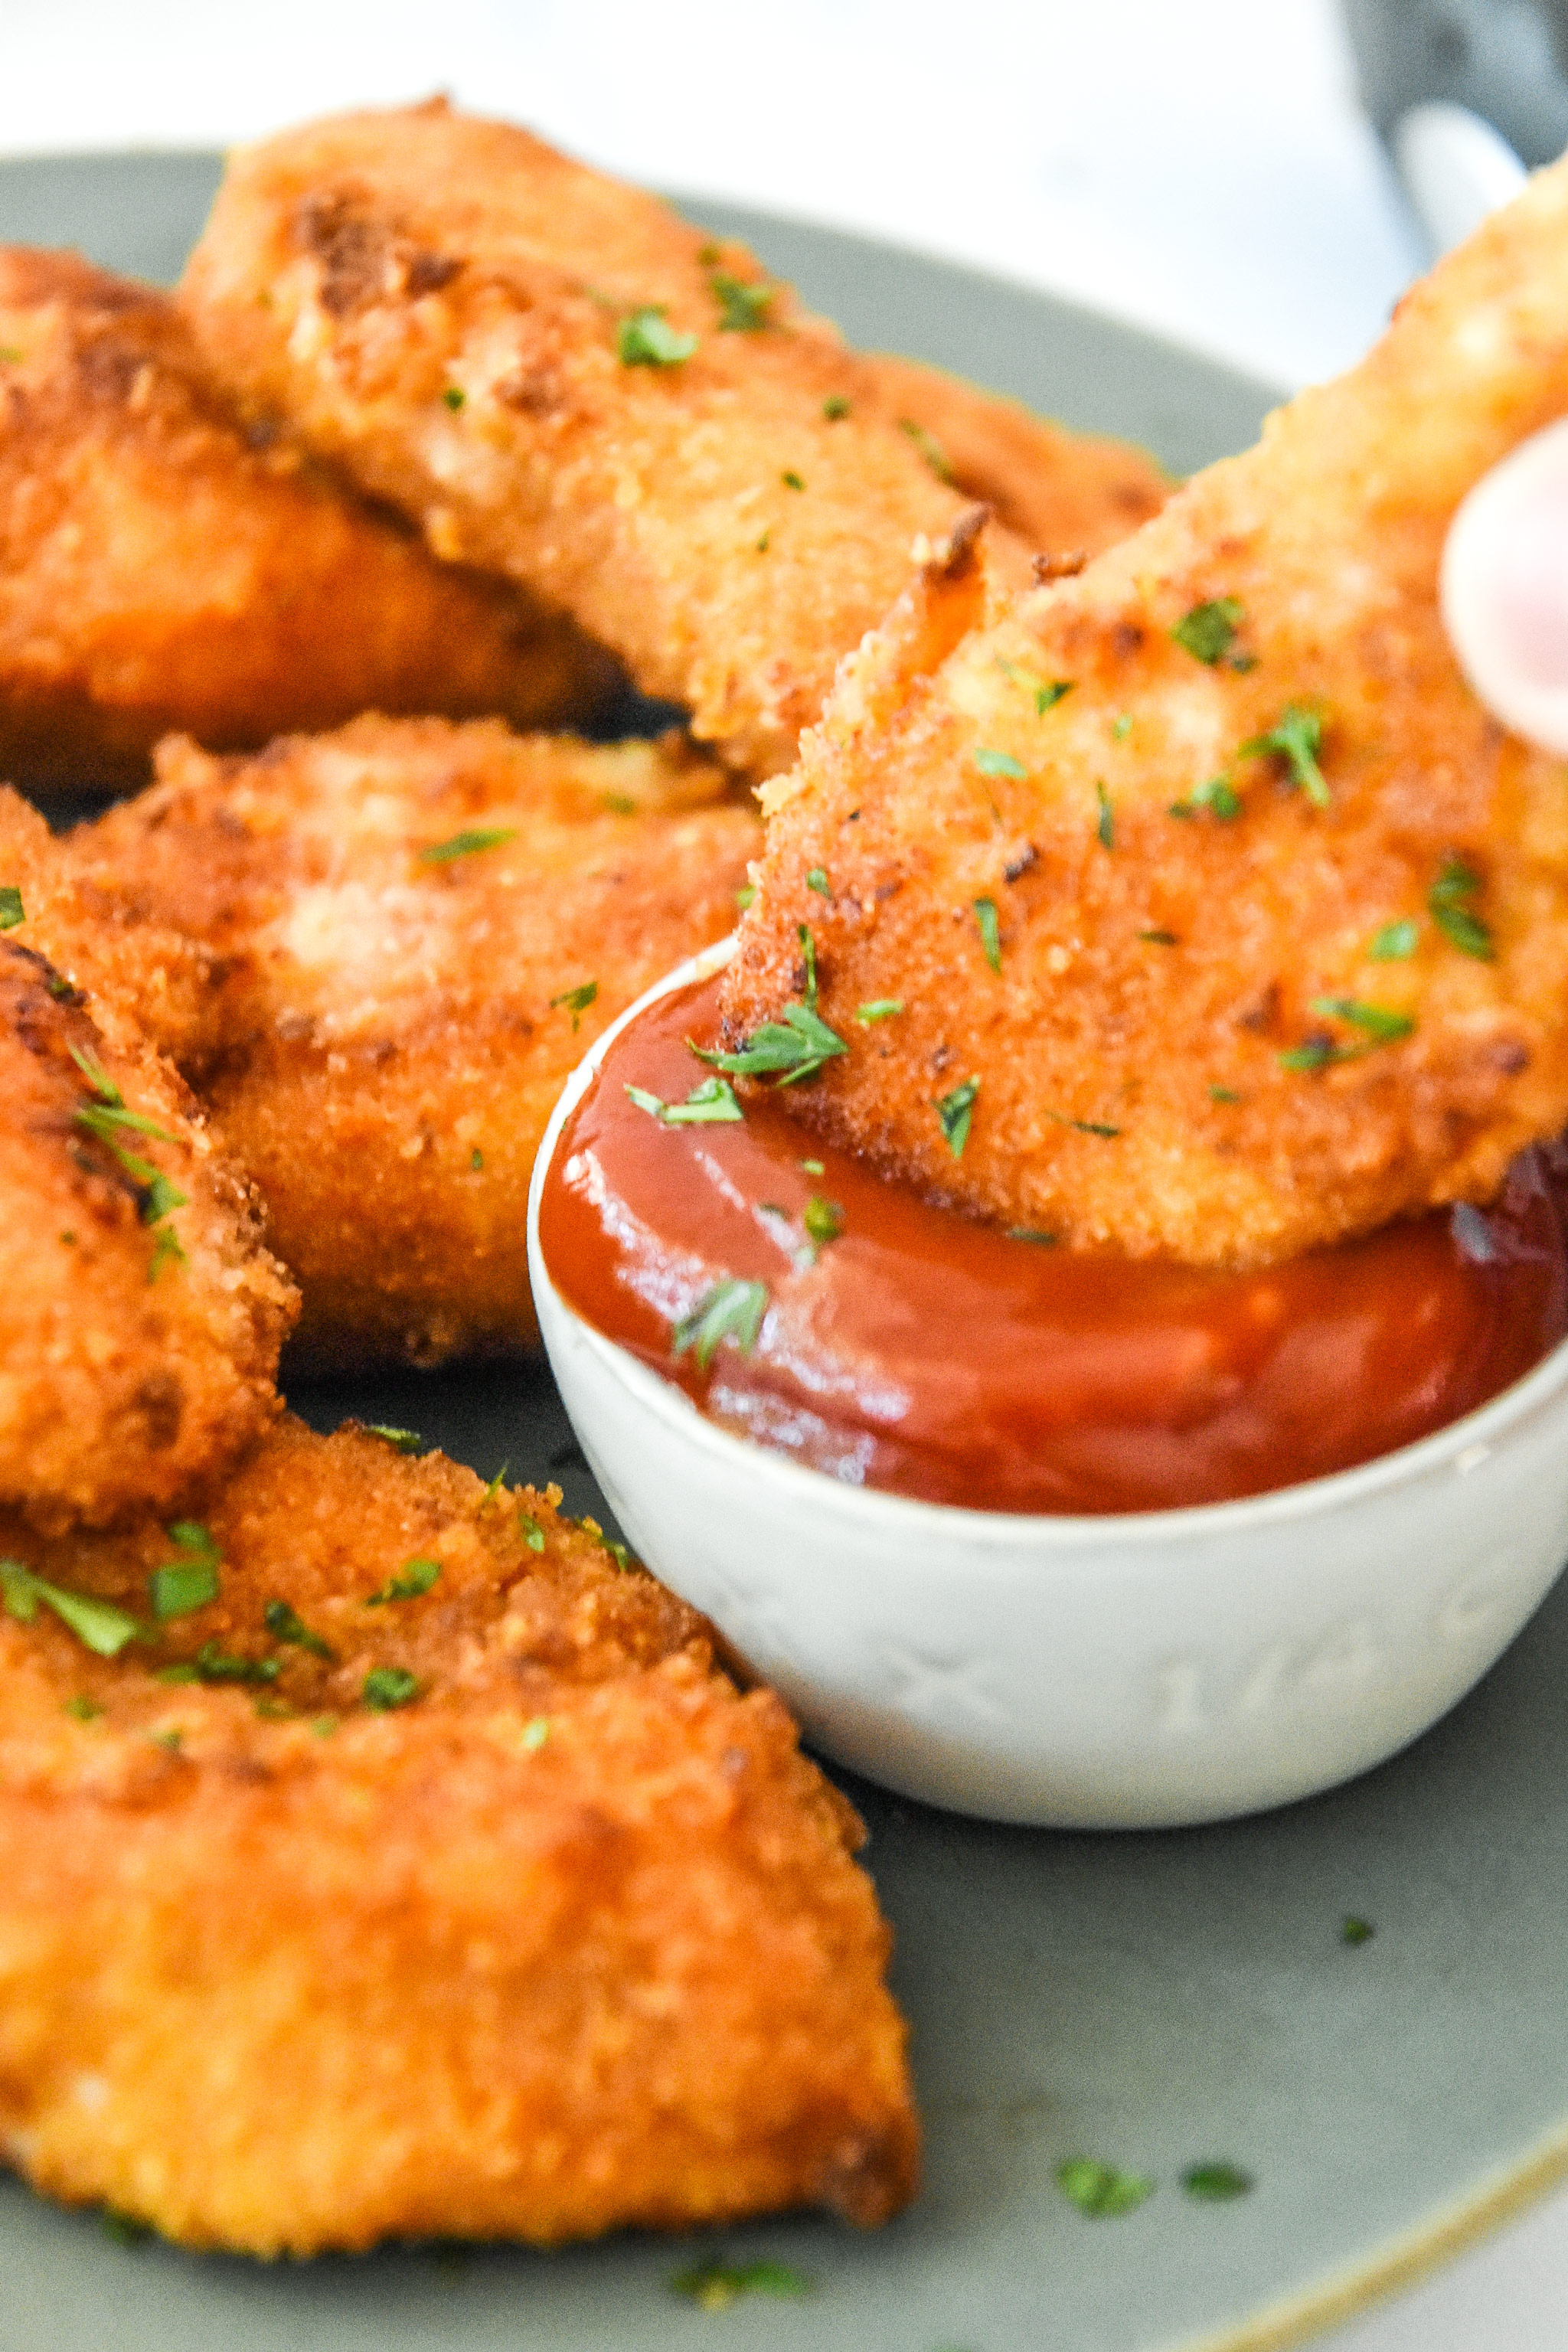 dipping a breaded chicken tender into ketchup.